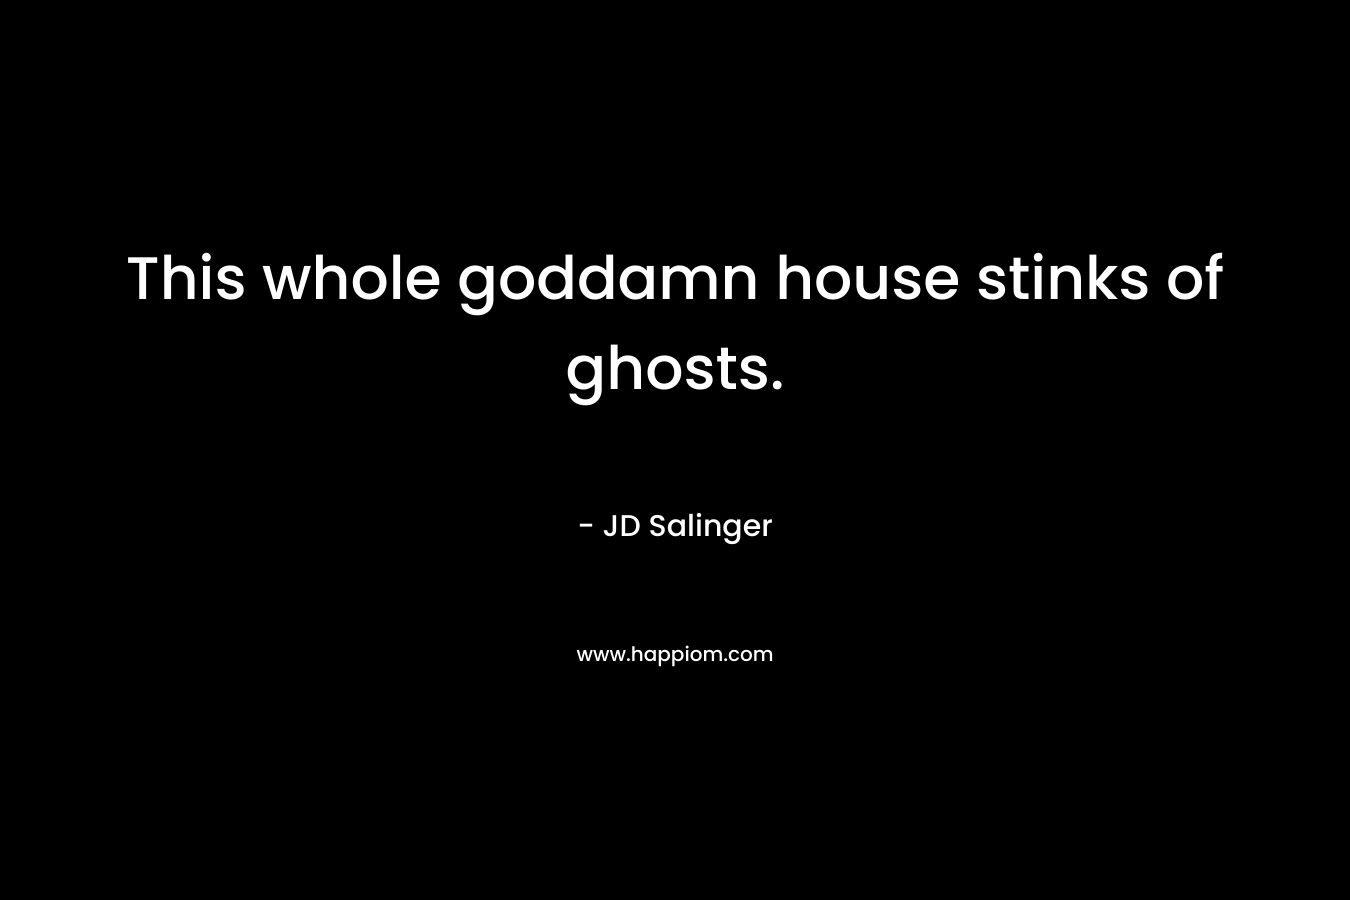 This whole goddamn house stinks of ghosts.